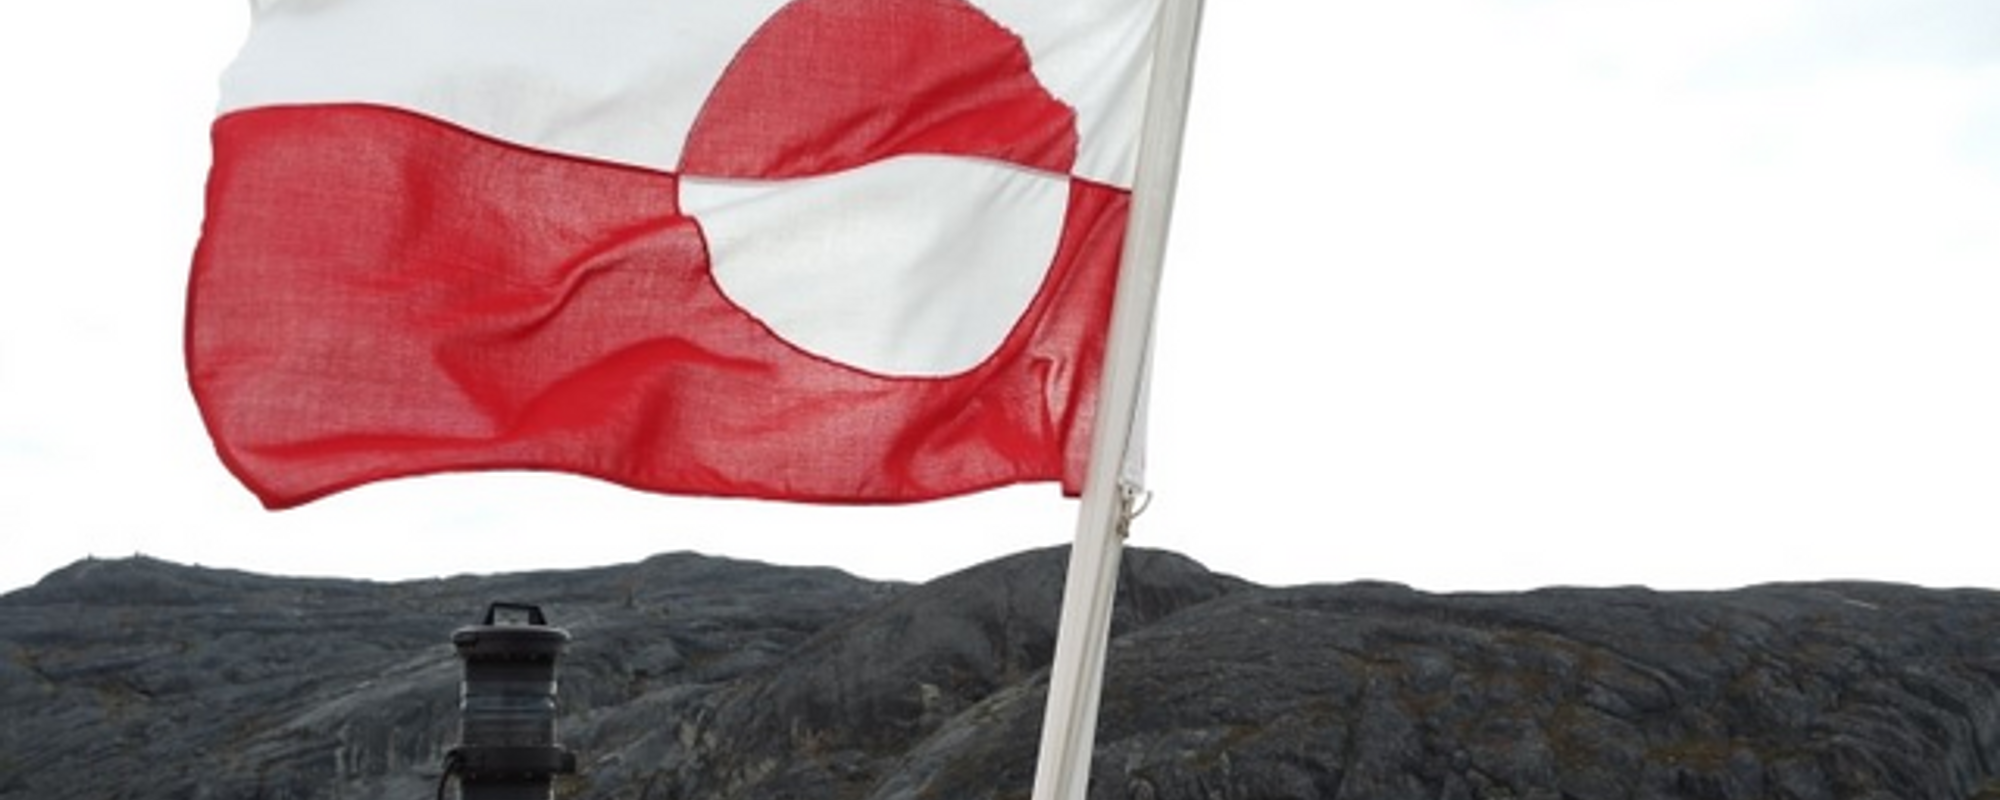 [Greenland Nuuk #14] A revival drive to find Greenland's identity, but young Greenlandic people lose